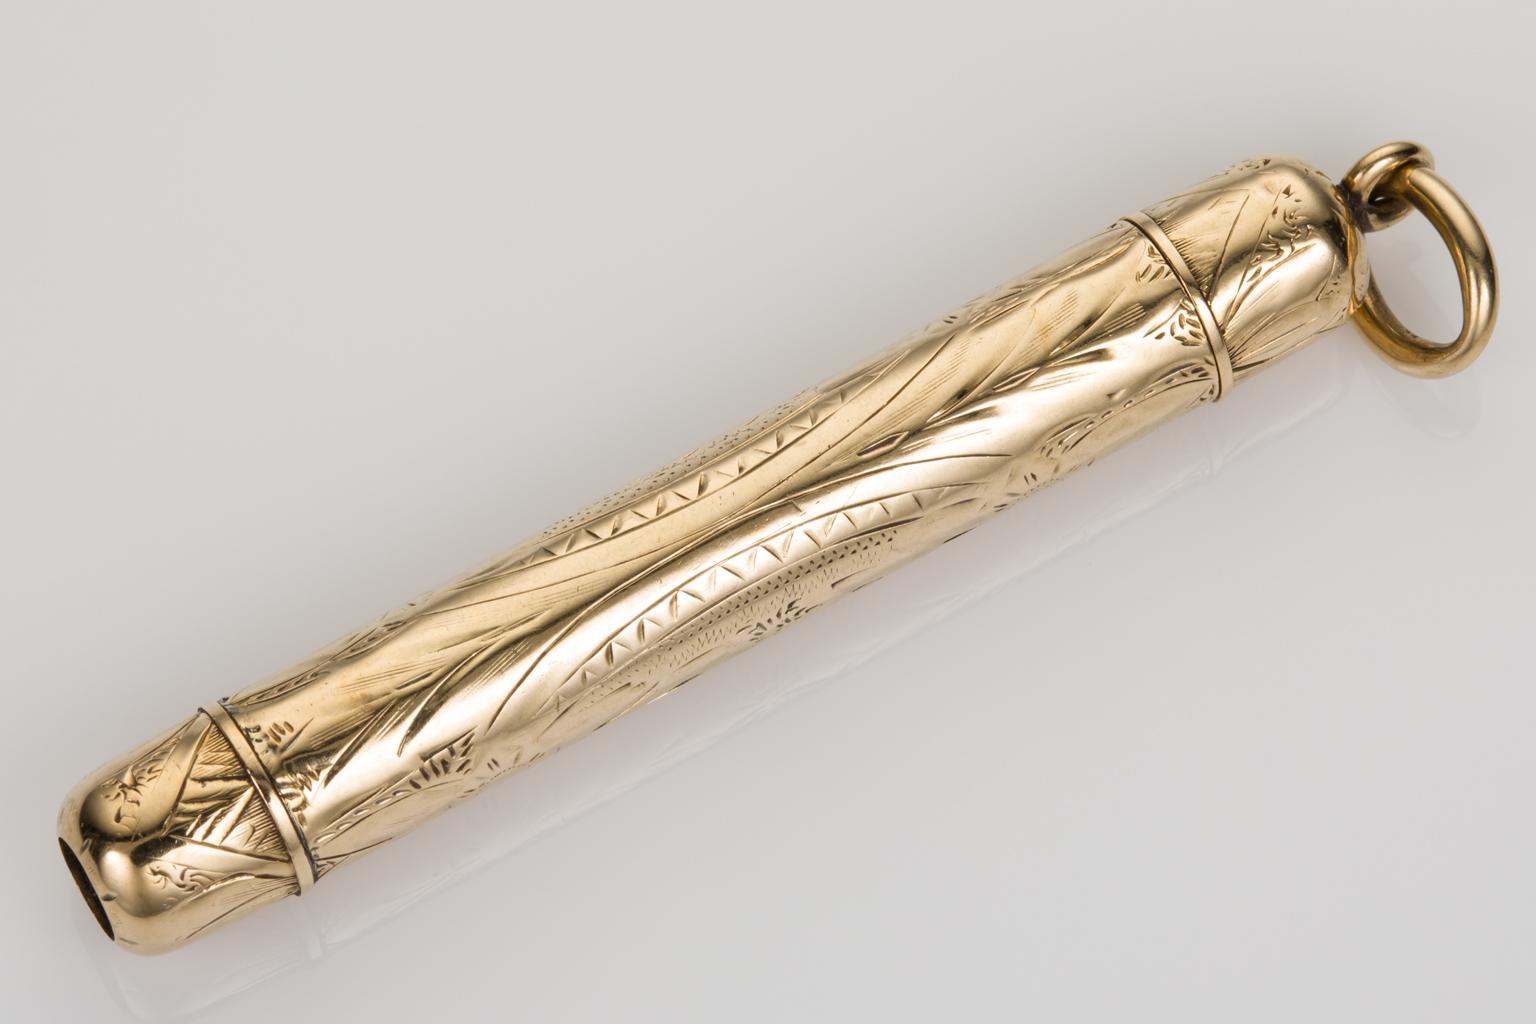 How wonderful is this piece, an antique 14k yellow gold Tiffany & Co signed retractable pencil. The outer case is embellished with beautiful hand engraving that covers the entire piece. When it is closed it measures 2 1/2 inches (6.35cm) including